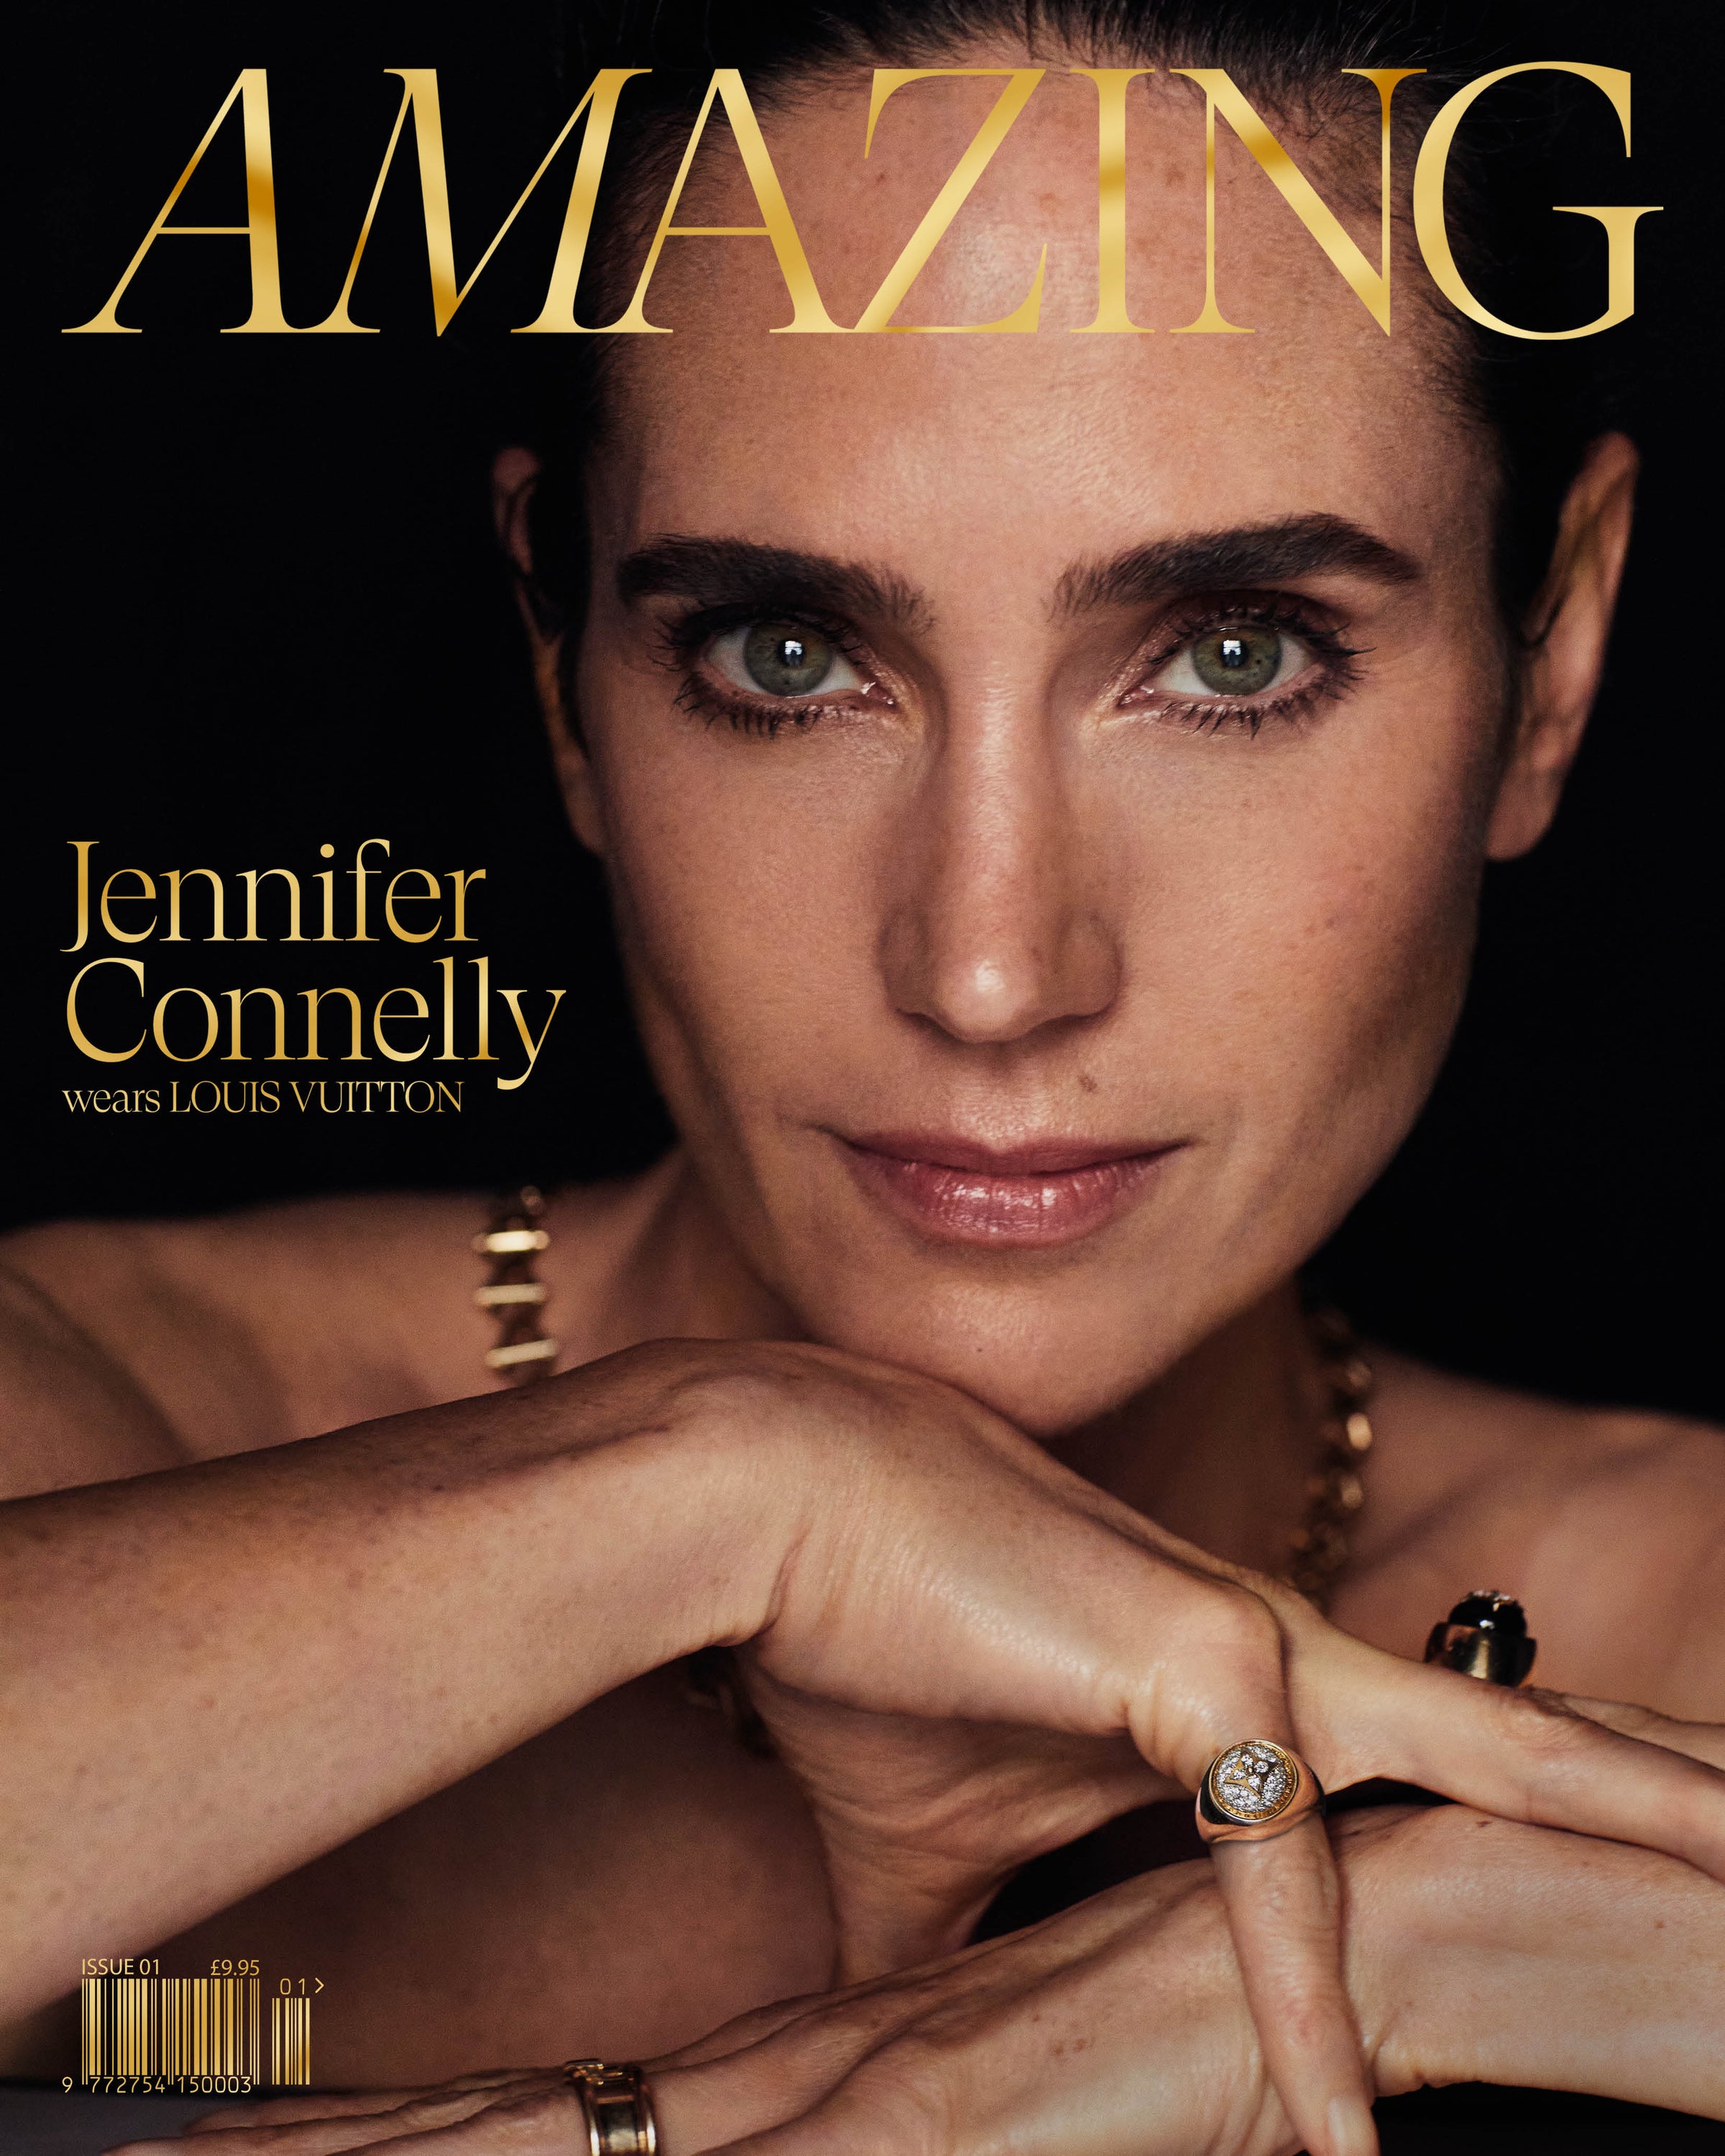 jennifer-connelly-covers-amazing-magazine-the-inaugural-issue